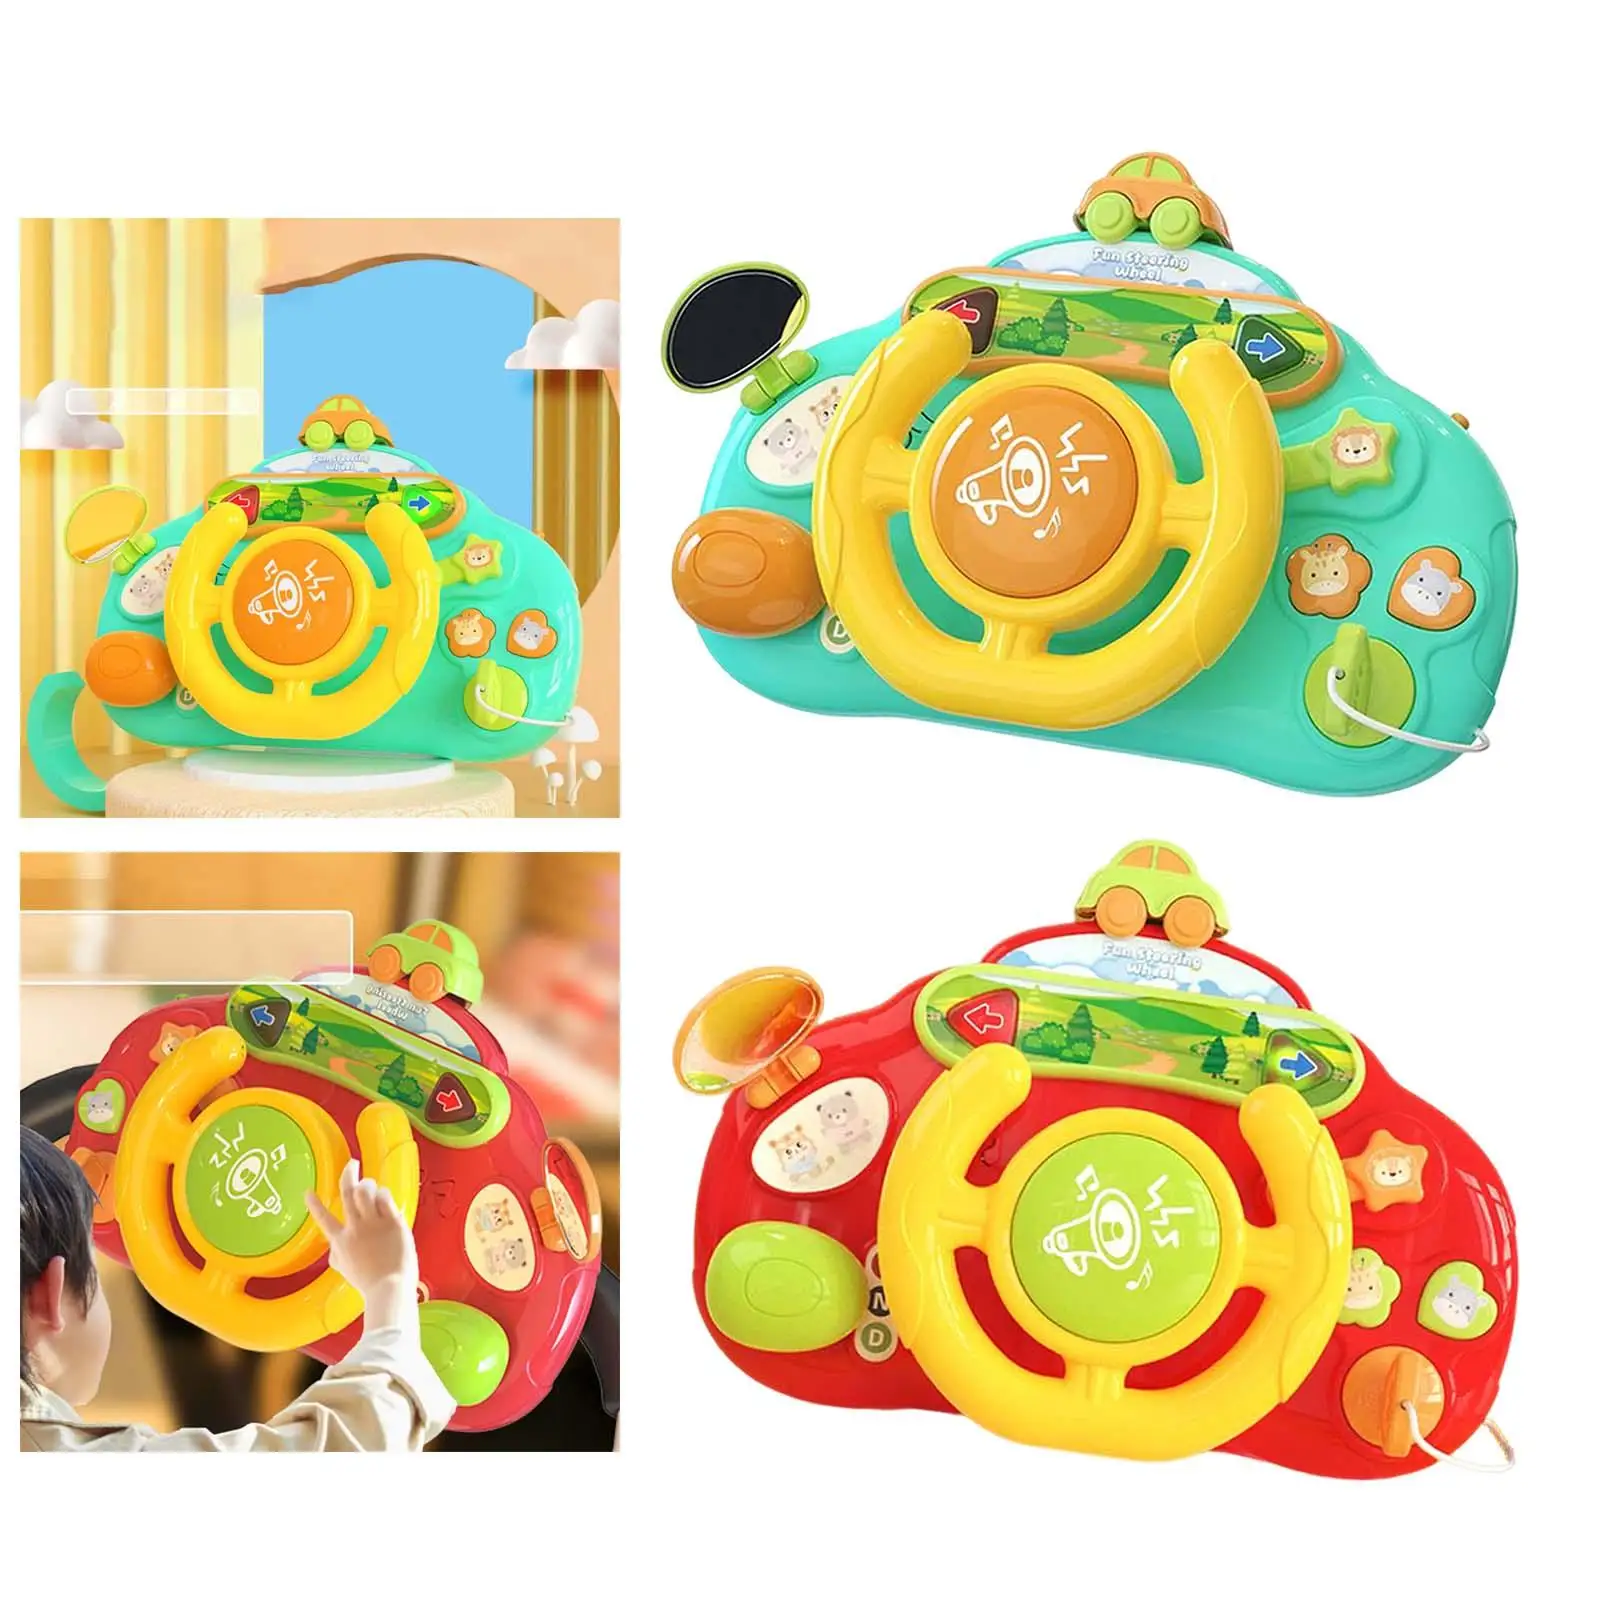 Simulation Steering Wheel Car Seat Toy Educational for Interaction Role Play